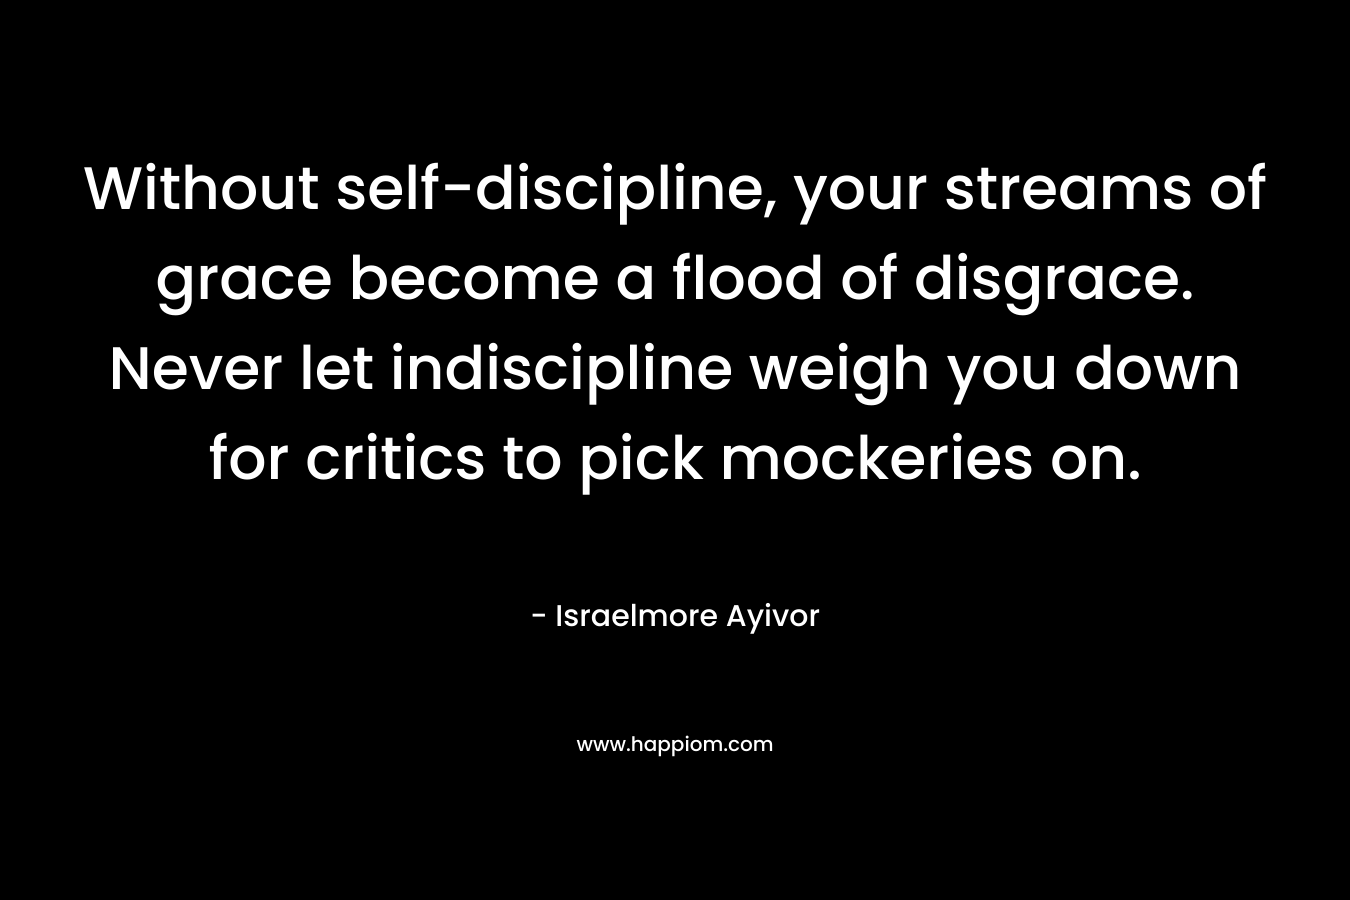 Without self-discipline, your streams of grace become a flood of disgrace. Never let indiscipline weigh you down for critics to pick mockeries on.